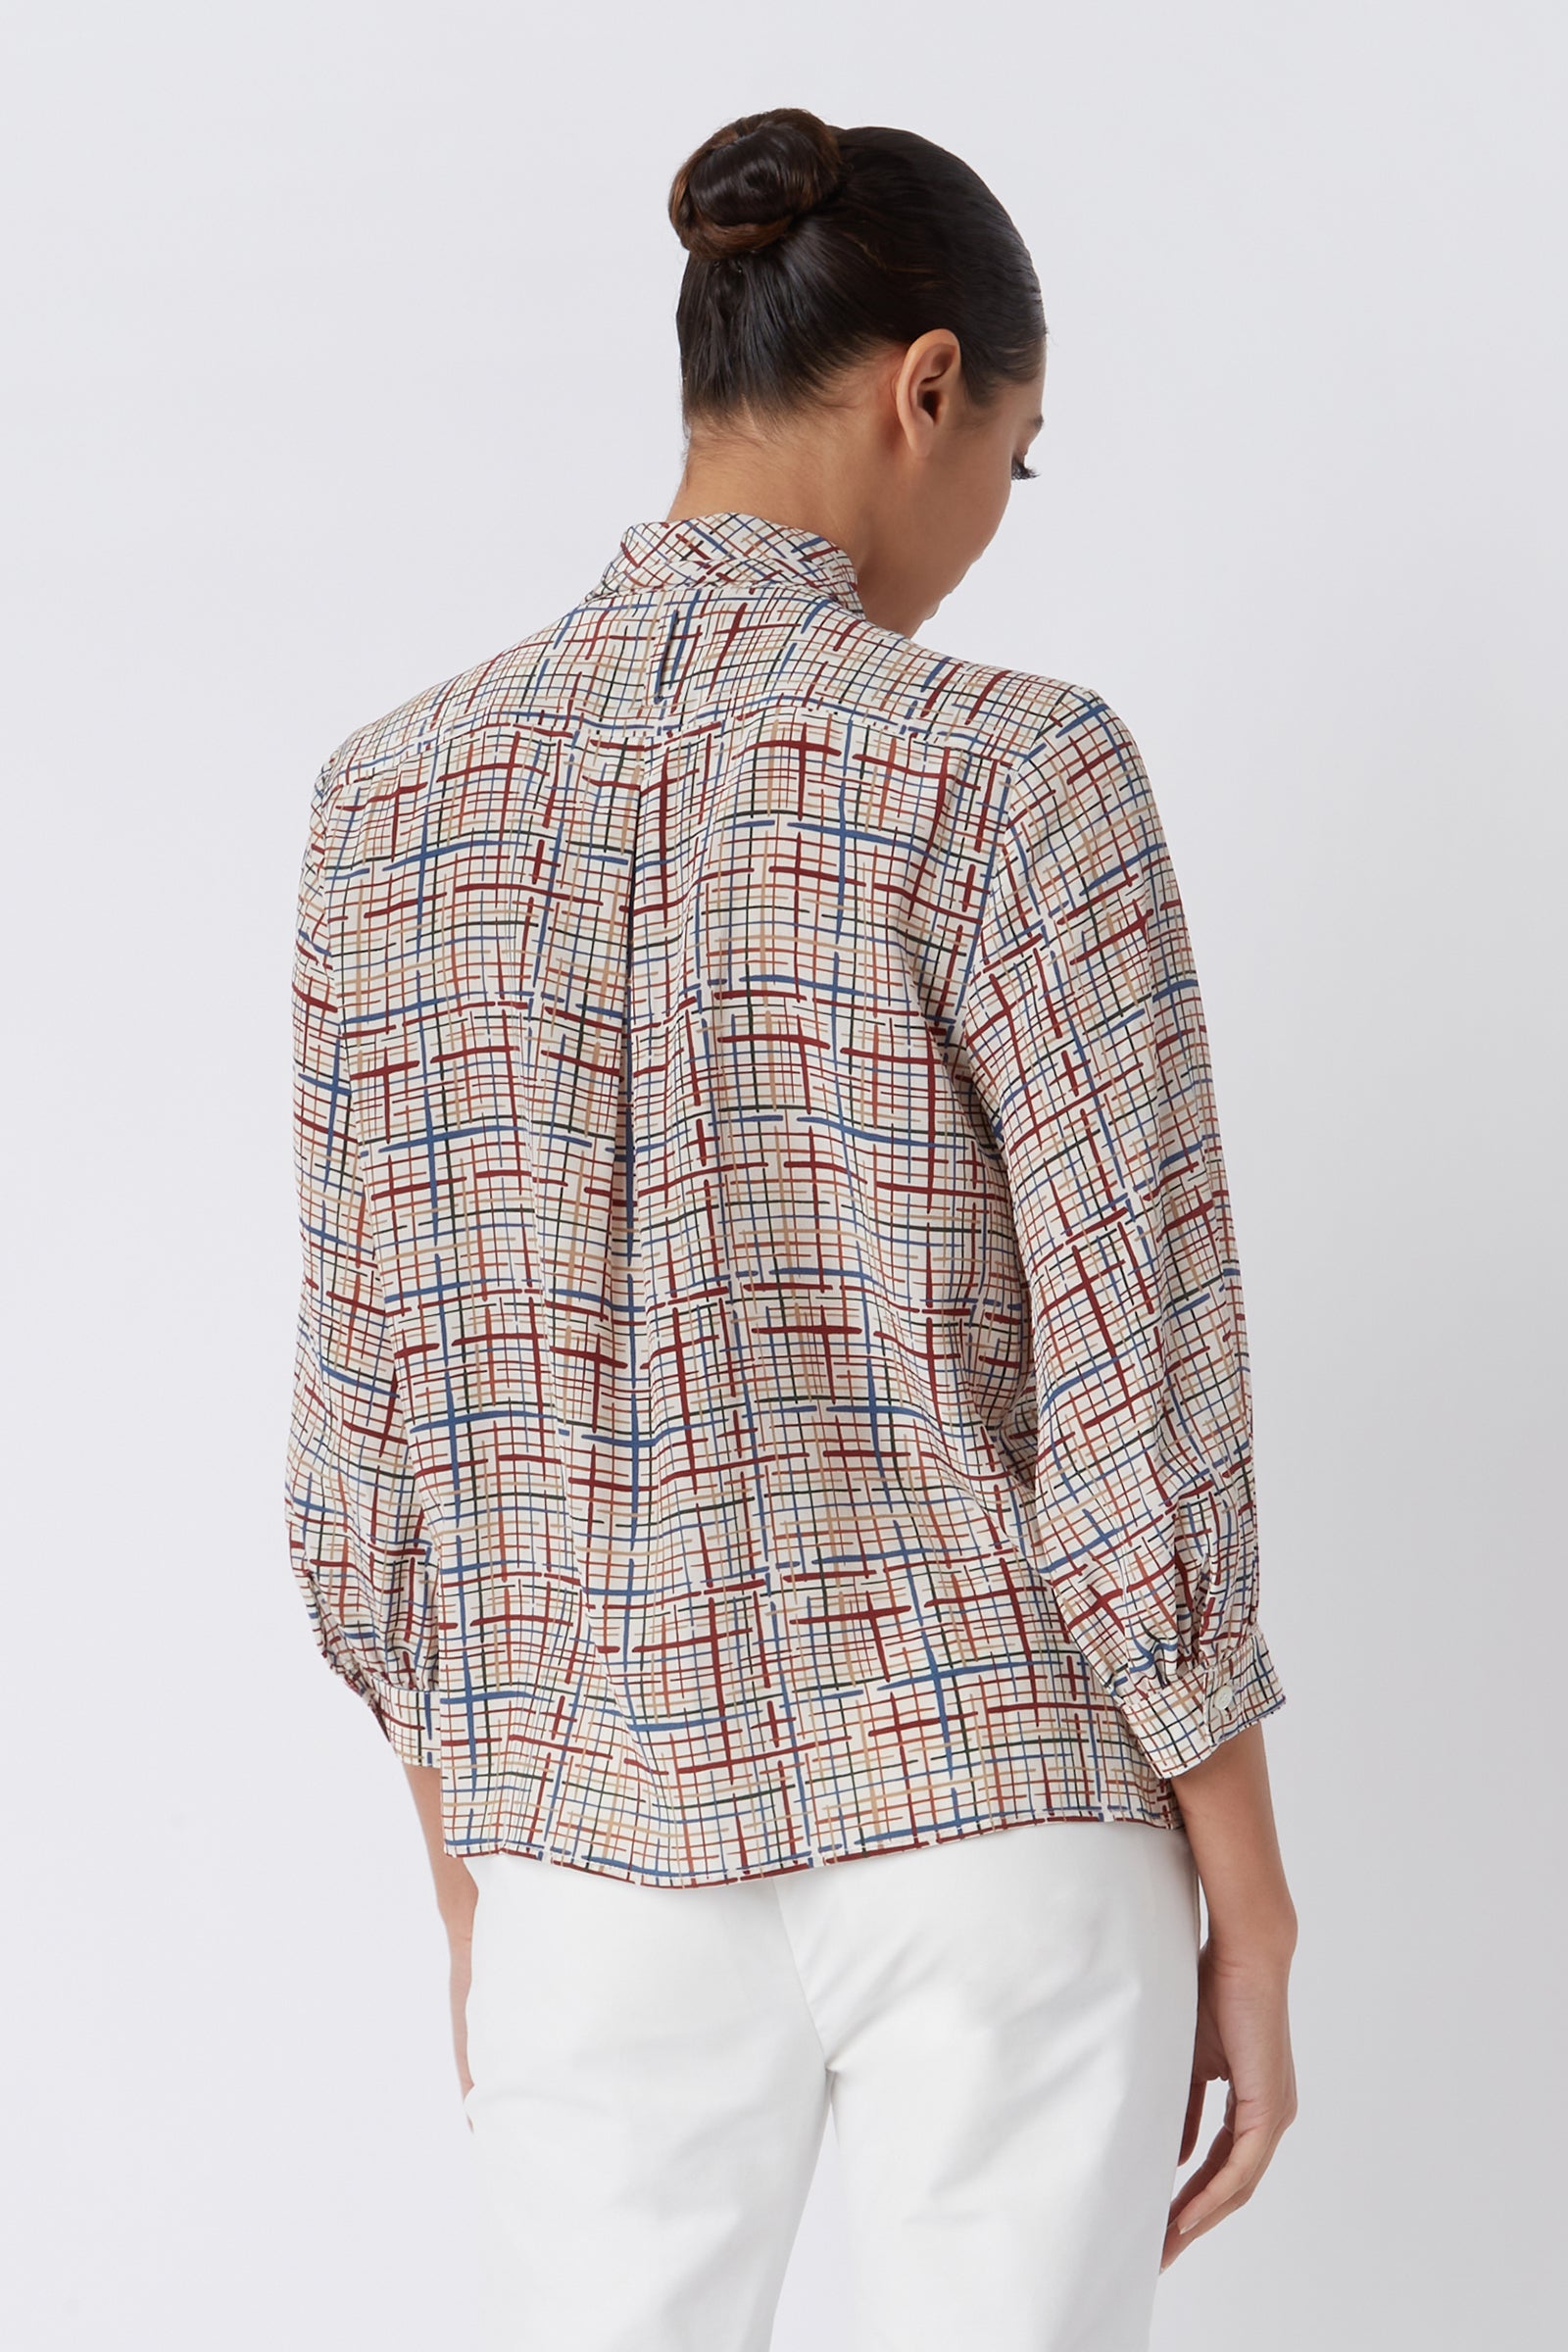 Kal Rieman Edith Scarf Blouse in Sketch Plaid on Model Cropped Front View